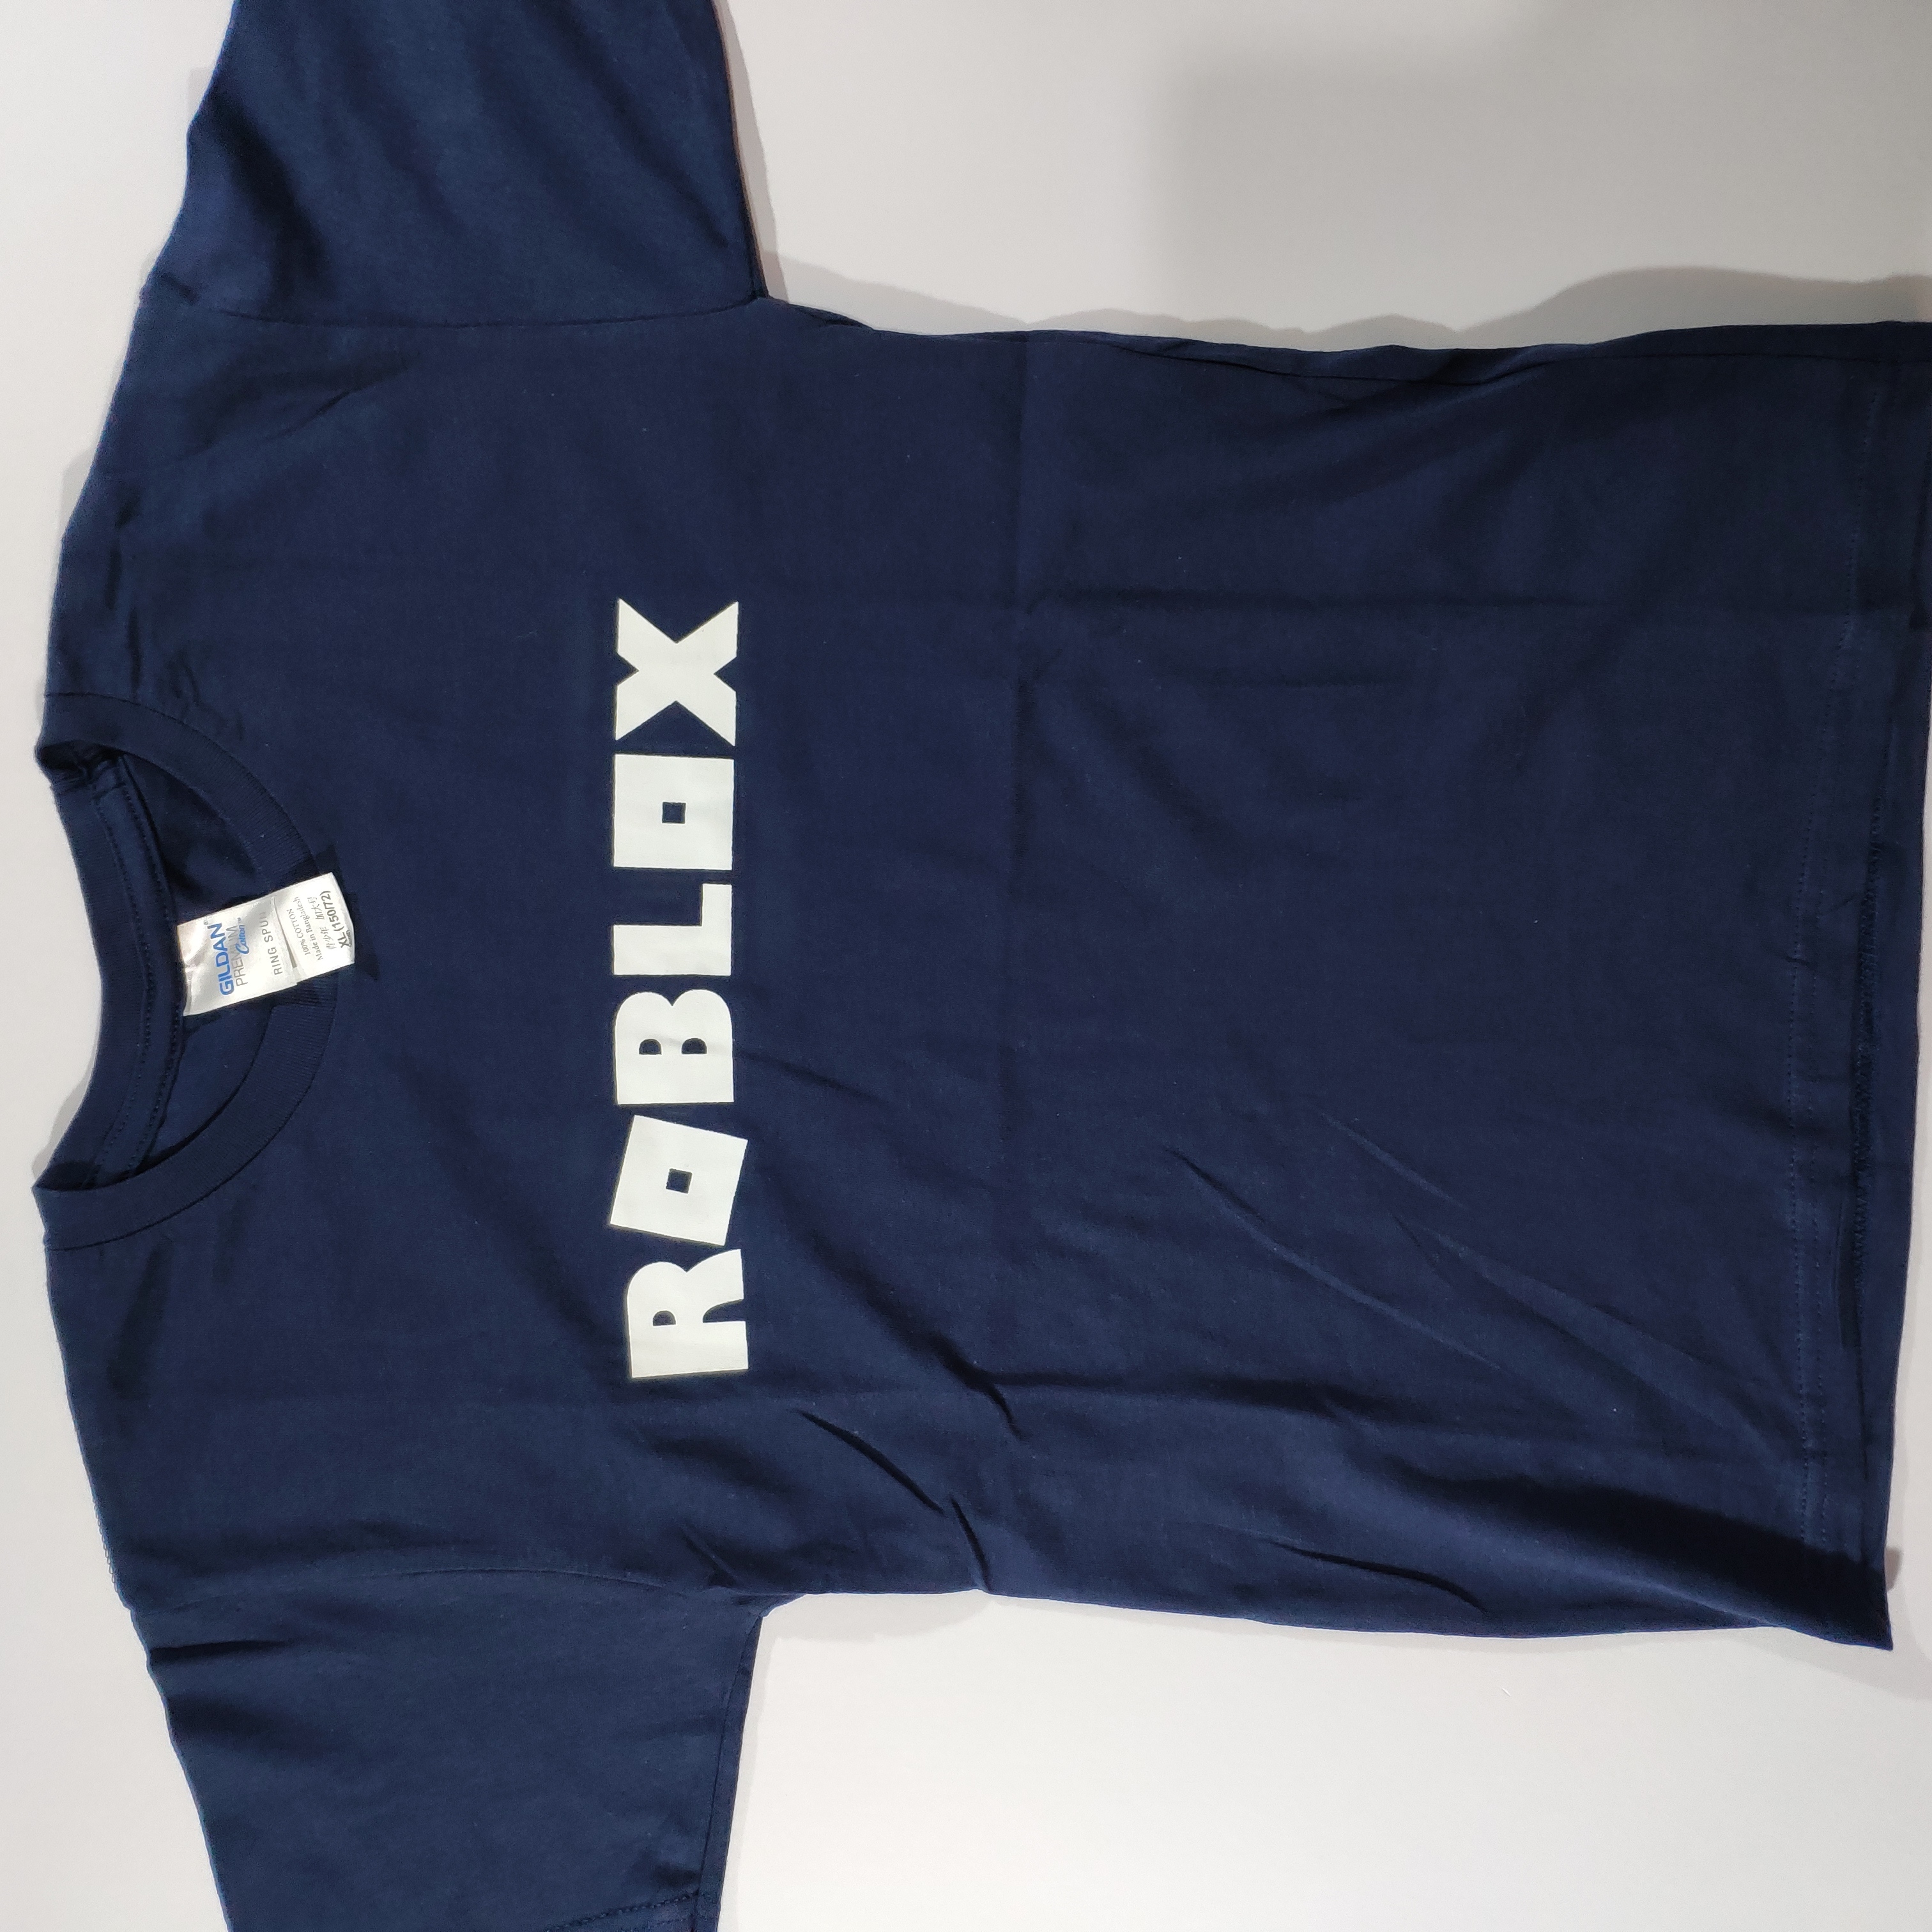 Roblox Kids T Shirt Buy Sell Online T Shirts Shirts With Cheap Price Lazada Ph - roblox t shirt philippines